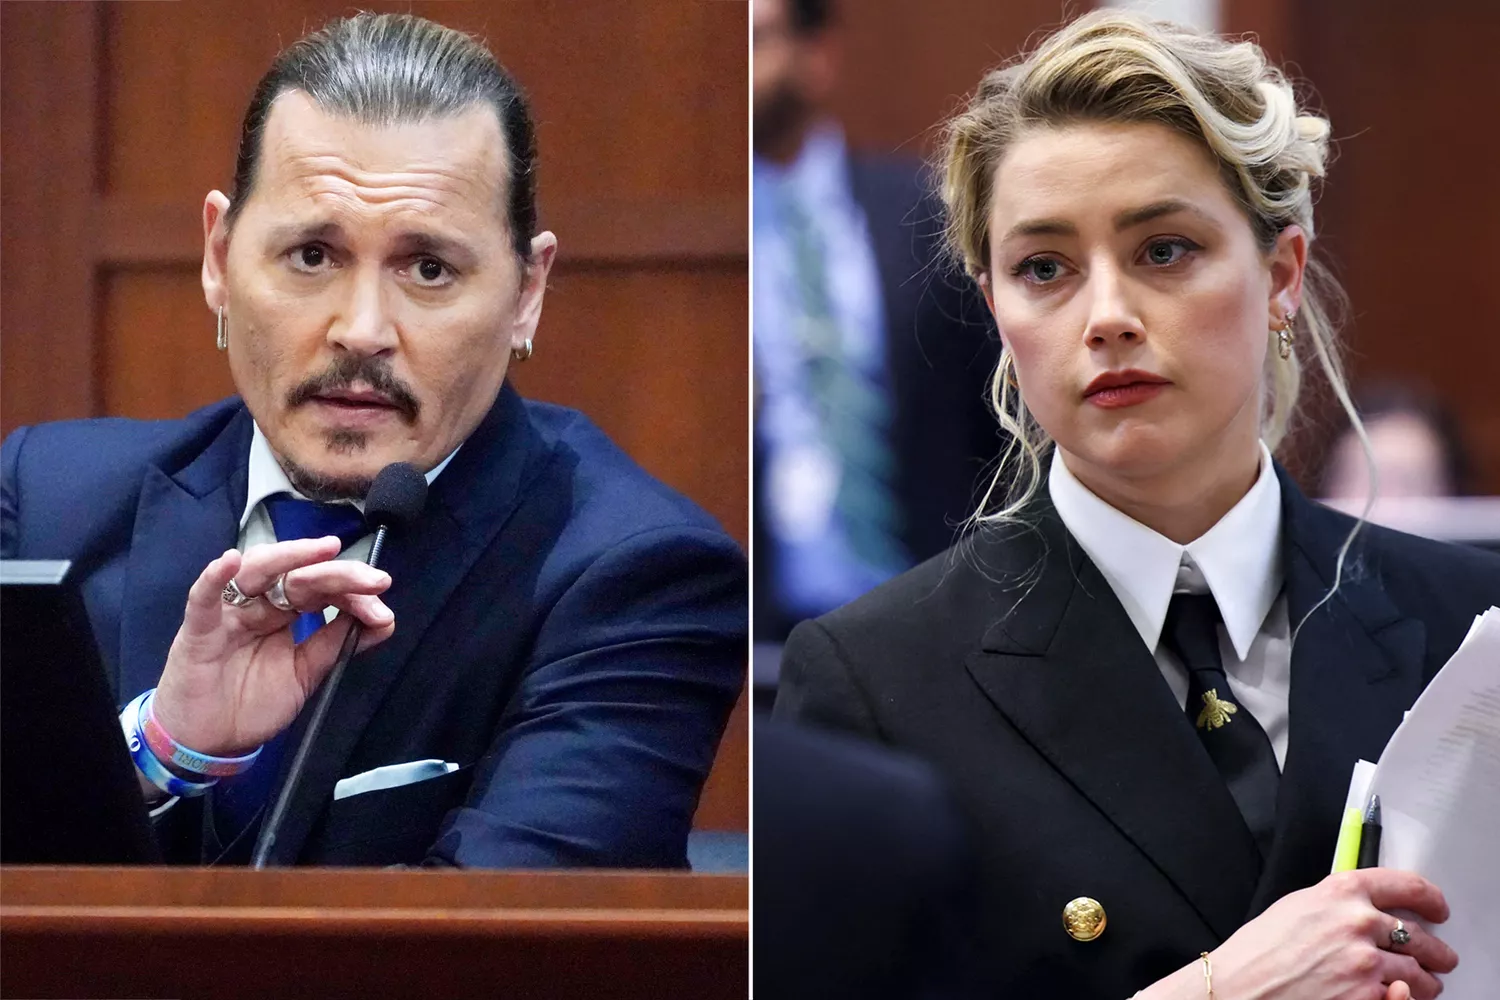 Amber Heard Pays Johnny Depp $1 Million Settlement 1 Year After Trial, Depp to Donate It to 5 Charities 10